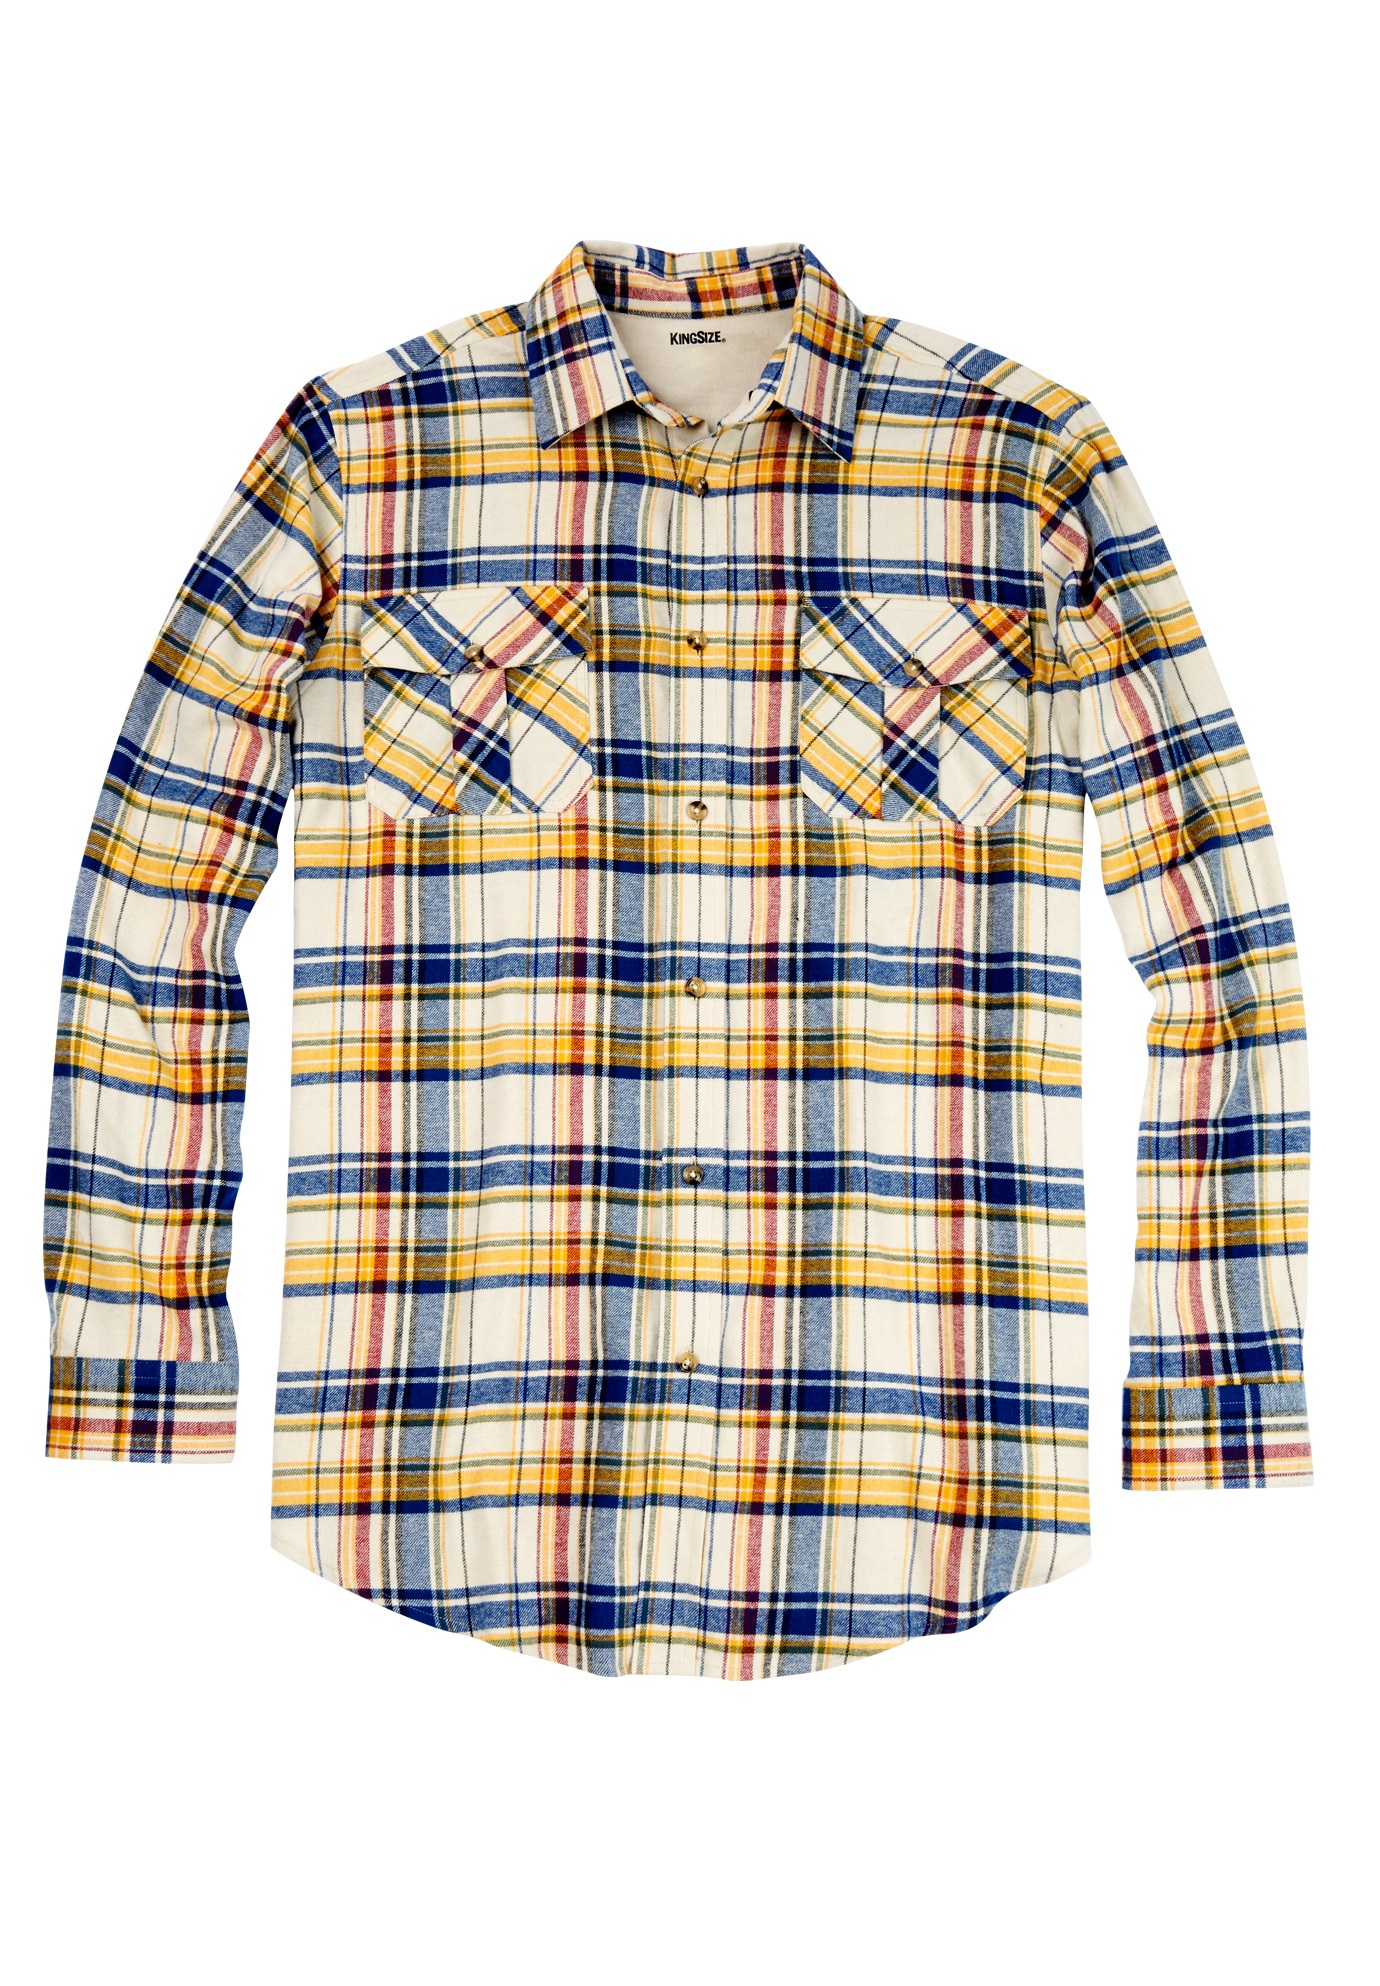 Double-Brushed Plaid Flannel Shirt | Fullbeauty Outlet